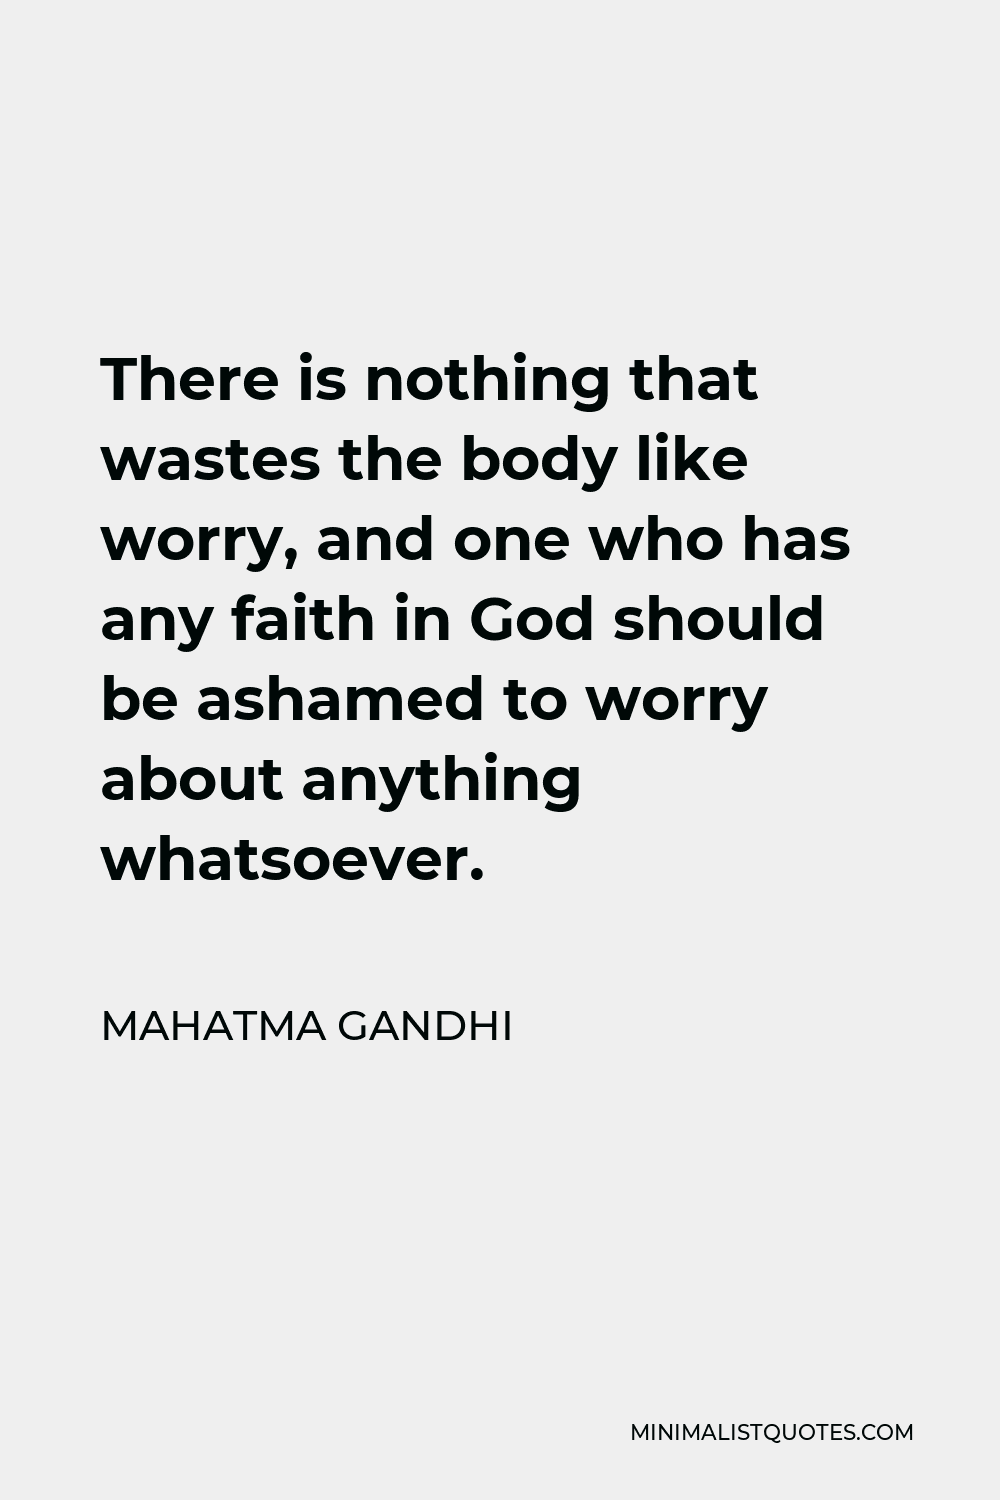 Mahatma Gandhi Quote - There is nothing that wastes the body like worry, and one who has any faith in God should be ashamed to worry about anything whatsoever.